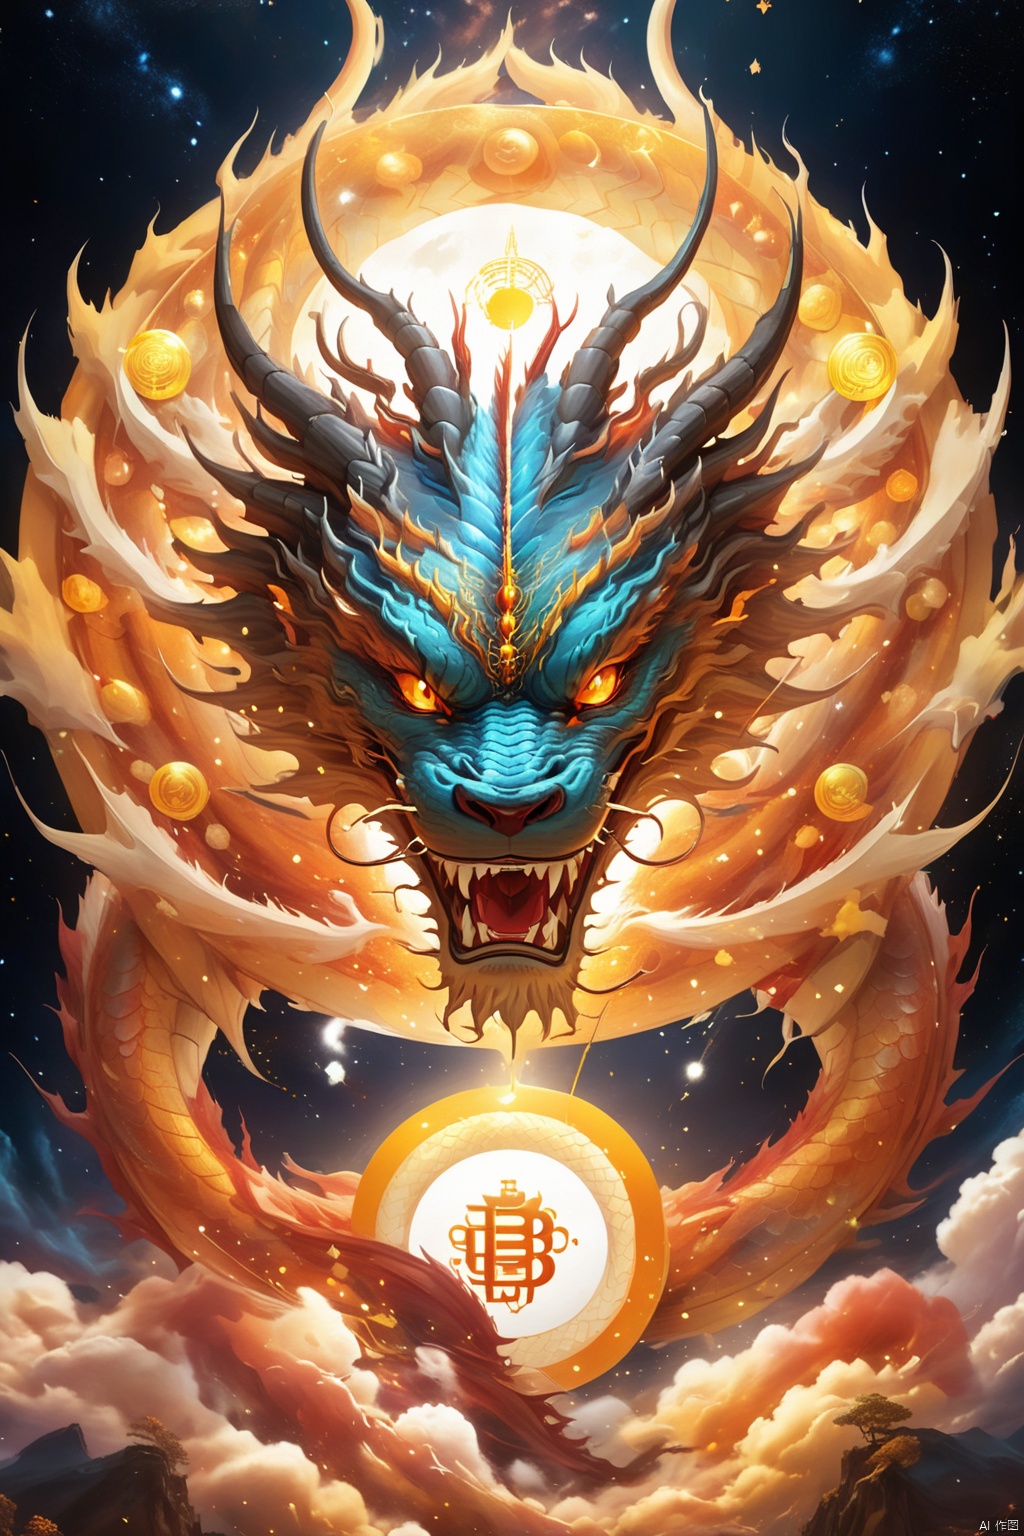  (Crypto Dragon King - Dragon with Five Claws: 1.48), (Dragon horn, dragon body, dragon tail), (mysterious halo: 1.36), (Star vortex, star river, star ring), travel in the universe, use digital crypto magic, guard the digital field, (cross-chain information: 1.24), (digital currency: 1.5), encryption algorithm, space-time light particles, (star vortex, star river, star ring), ultra HD, super detail, epic shock, visual art, surreal, mythological legend style, God beast, BJ_Sacred_beast